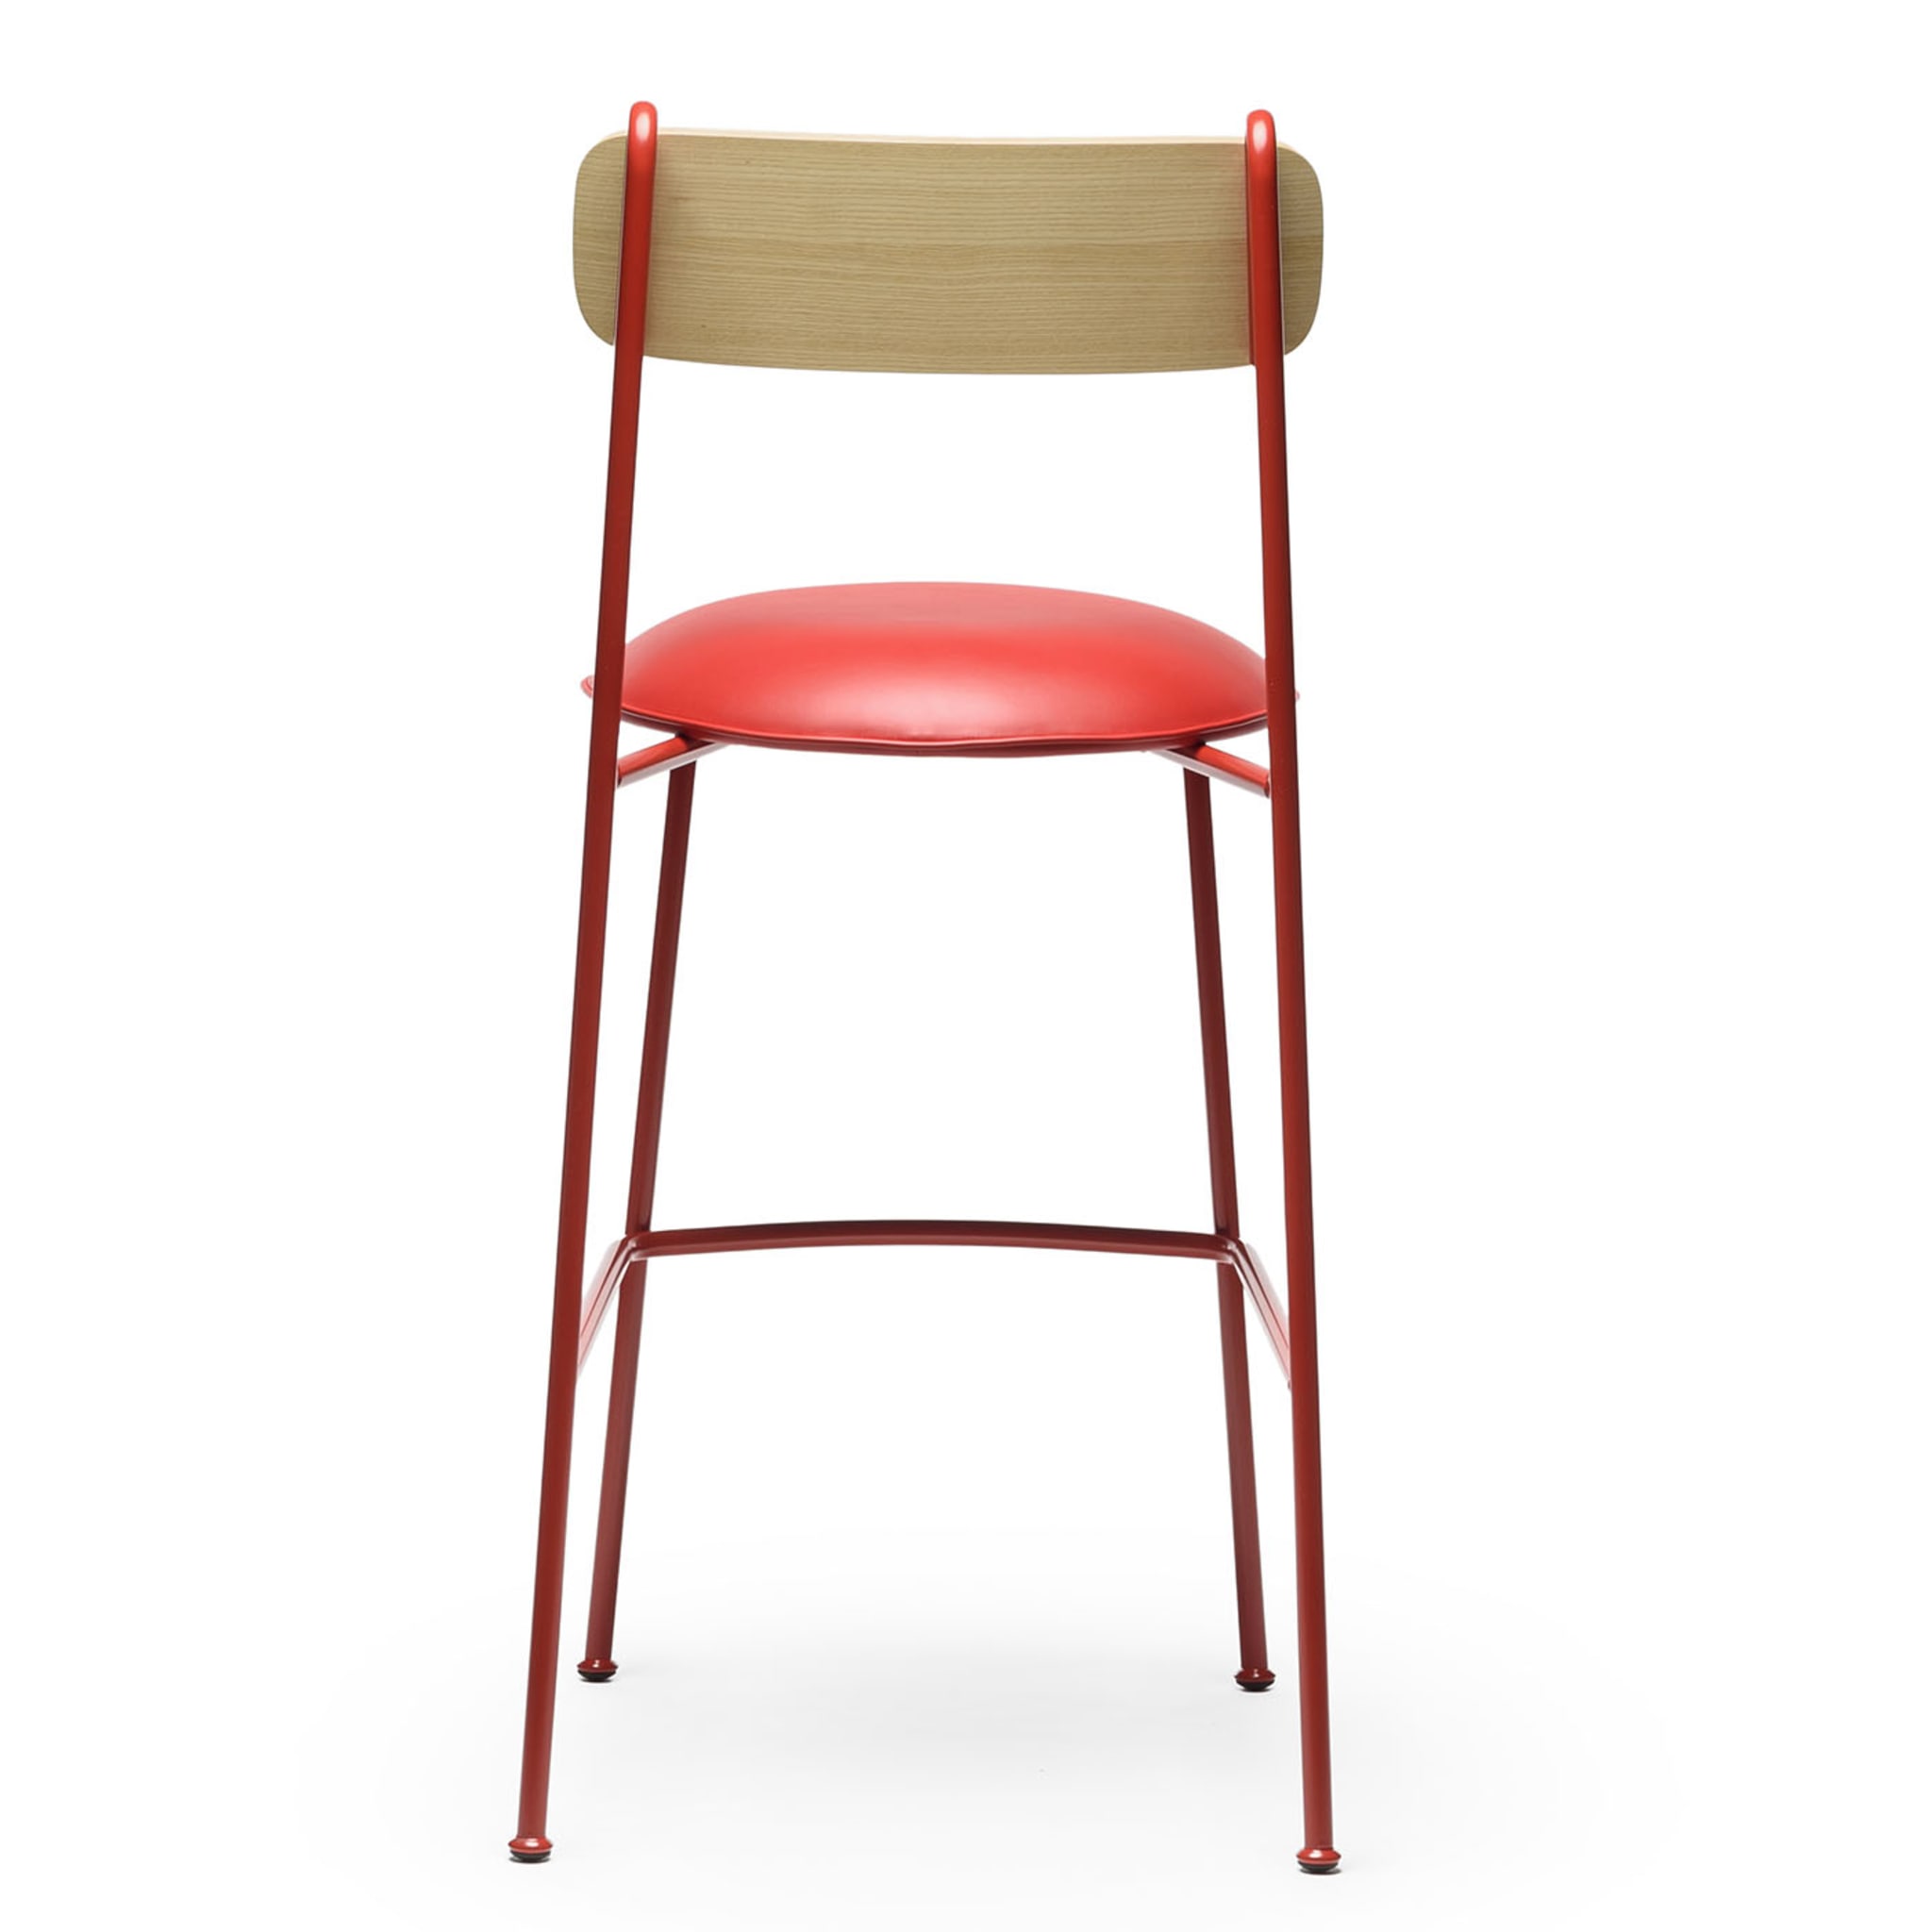 Lena Sg-75 Red And Natural Ash Bar Stool By Designerd - Alternative view 5